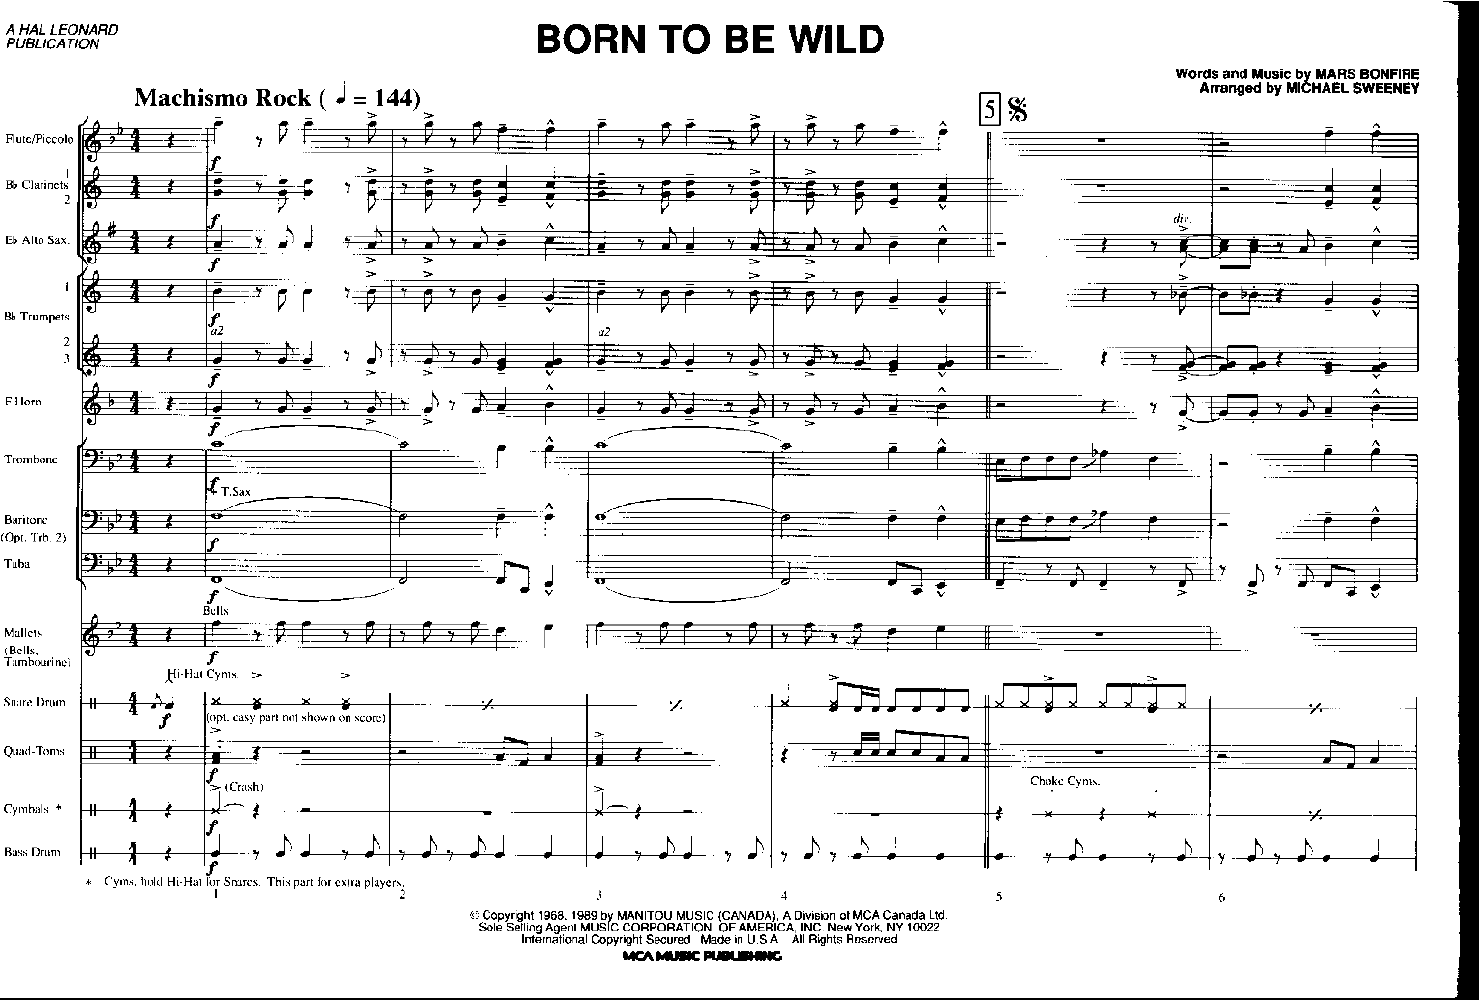 Born To Be Wild, by The Byrds - lyrics with pdf